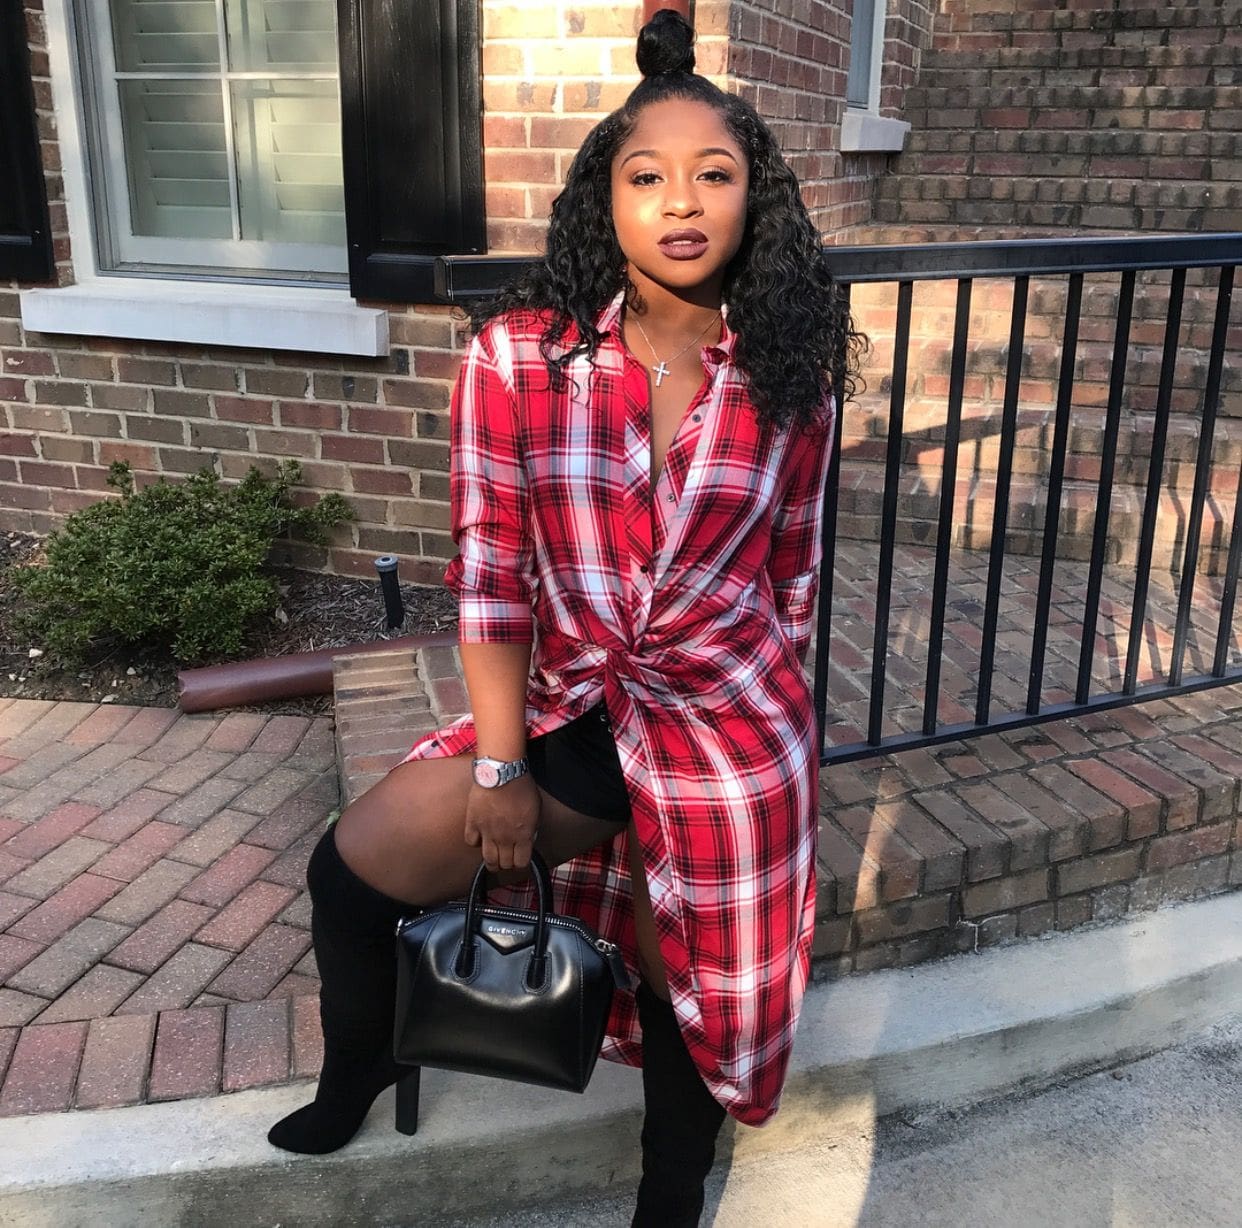 Reginae Carter Flaunts Her Toned Body On A Boat In Spain While YFN Lucci Is Hateful On Social Media